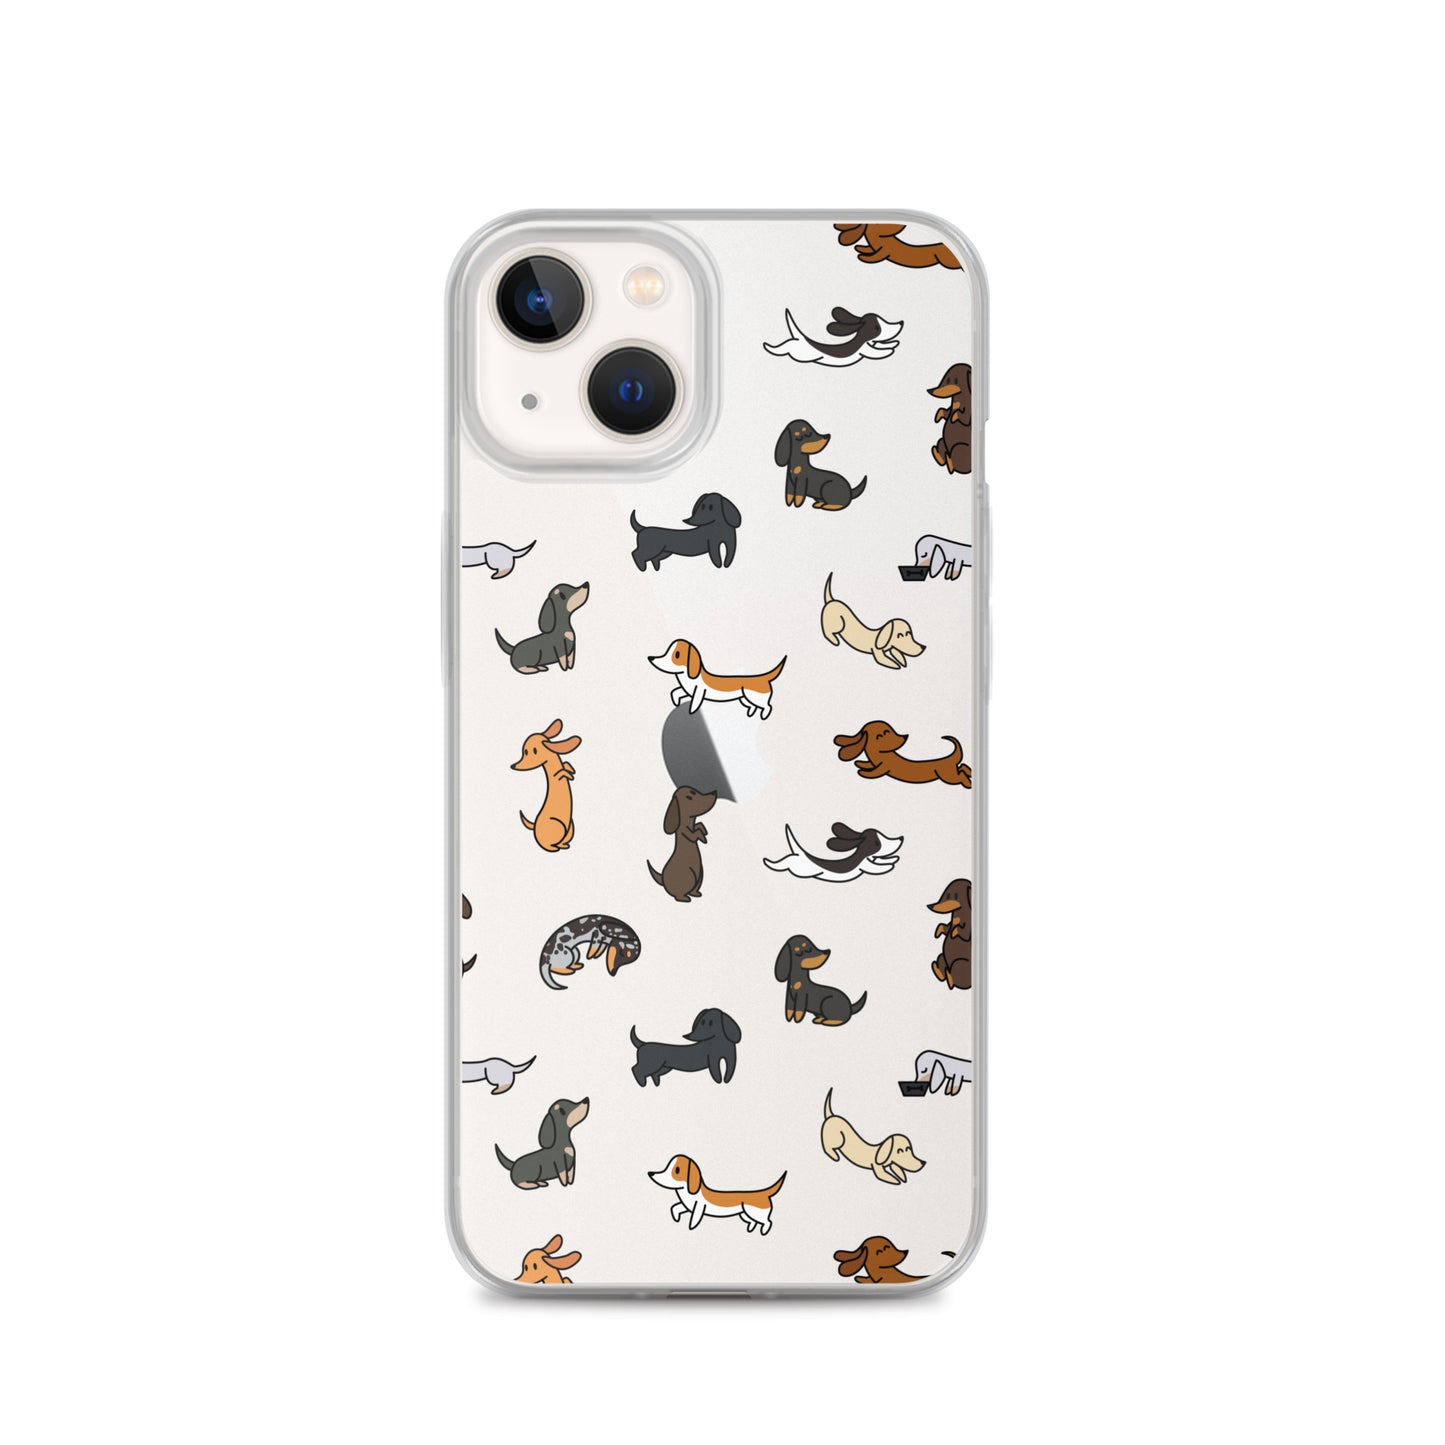 Dachshunds Patterned iPhone Clear Case